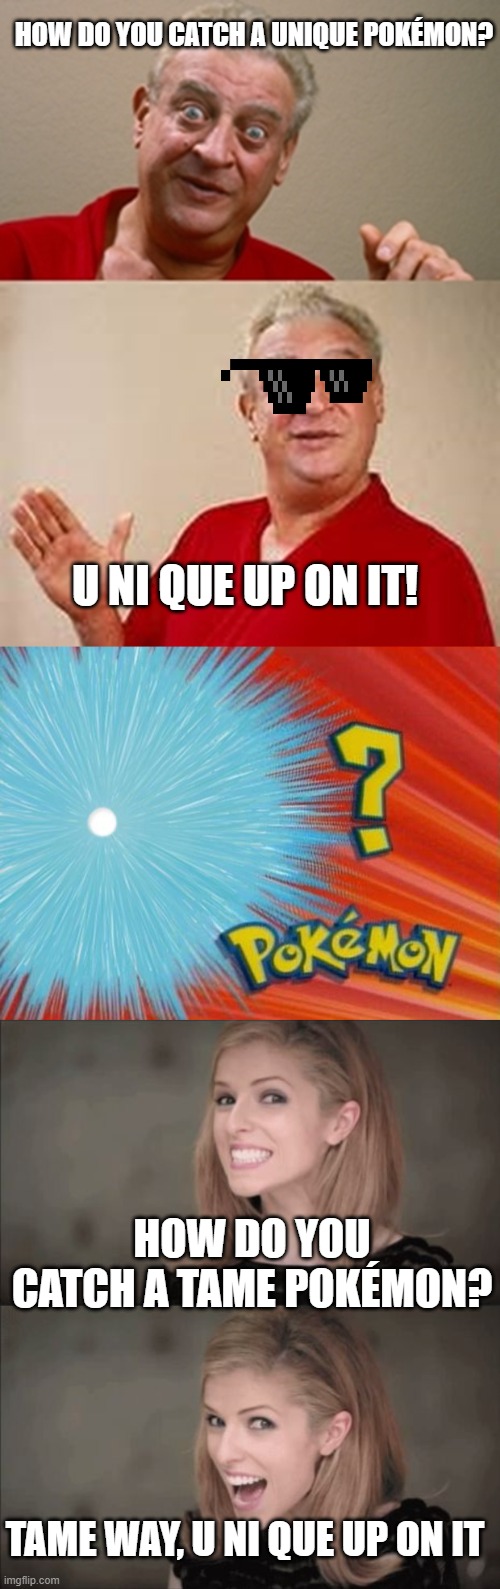 HOW DO YOU CATCH A UNIQUE POKÉMON? U NI QUE UP ON IT! HOW DO YOU CATCH A TAME POKÉMON? TAME WAY, U NI QUE UP ON IT | image tagged in bad pun dangerfield,who is that pokemon,memes,bad pun anna kendrick | made w/ Imgflip meme maker